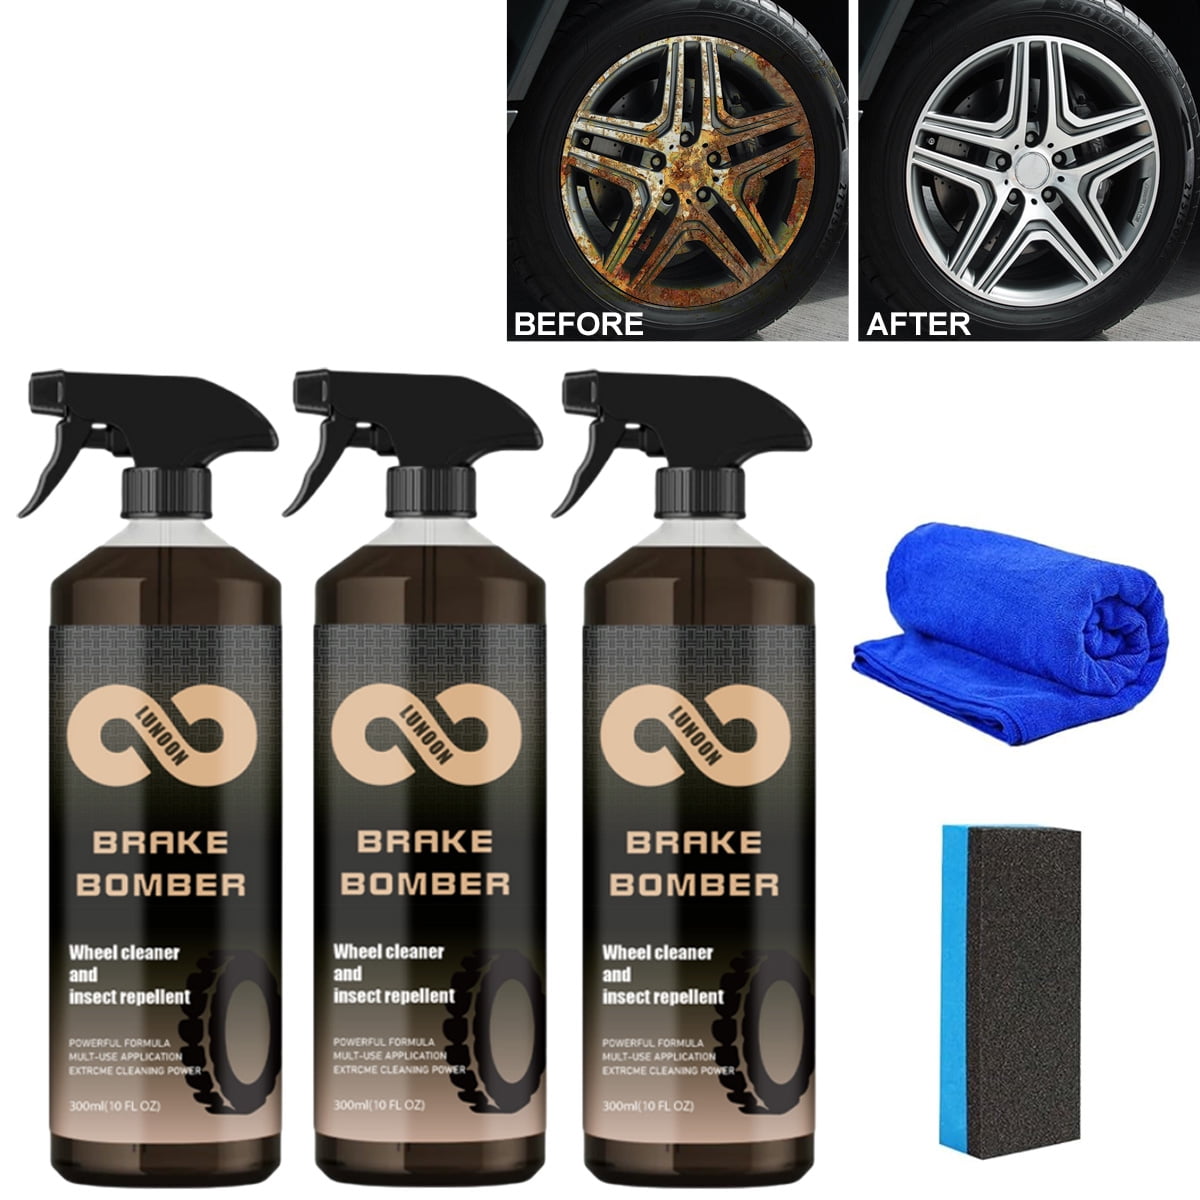  Brake Bomber Wheel Cleaner and Bug Remover, Break Bomber Ruins  Wheels, Powerful Non-Acid Truck & Car Wheel Cleaner, Safe On Alloy, Chrome,  Painted Wheels Upgrade (100ml, 1 Set) : Automotive